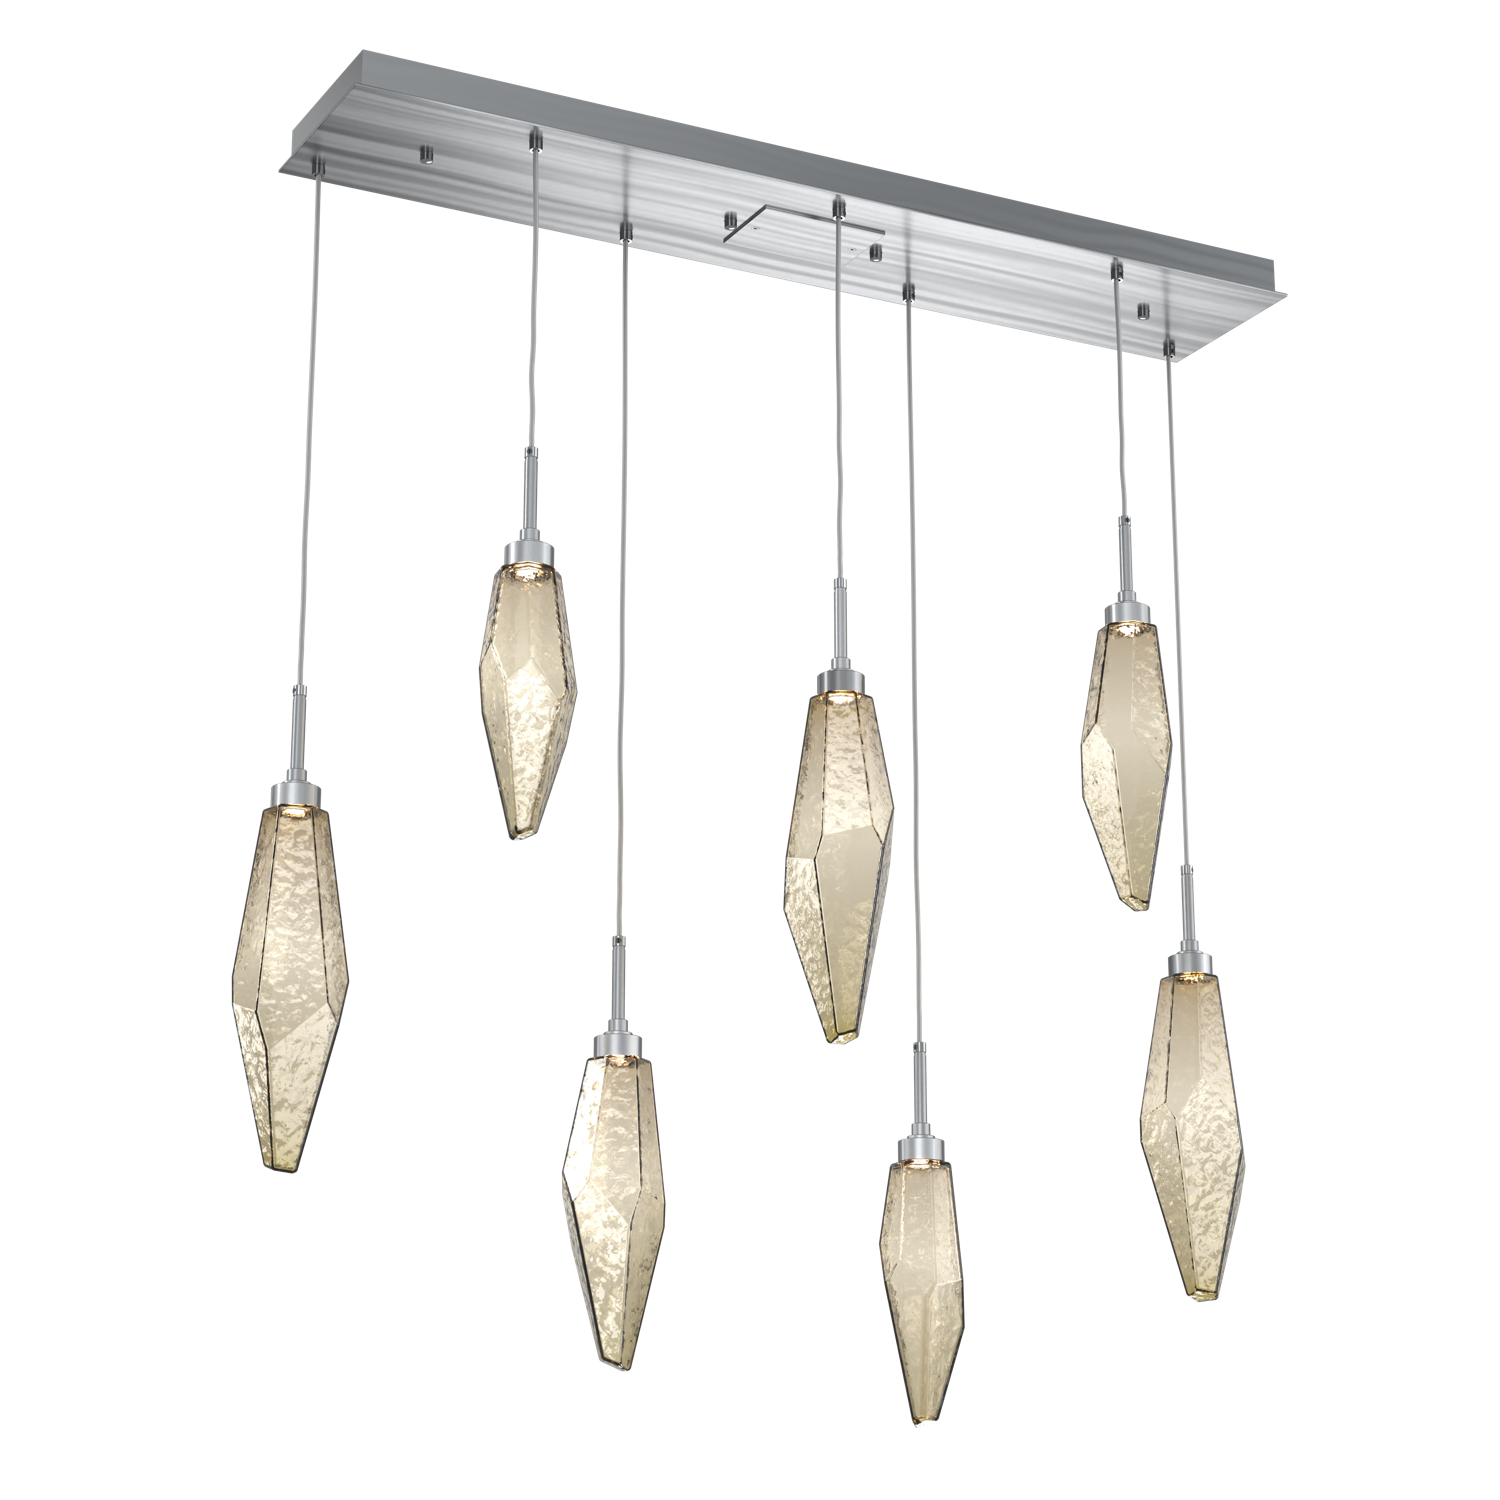 PLB0050-07-GM-CB-Hammerton-Studio-Rock-Crystal-7-light-linear-pendant-chandelier-with-gunmetal-finish-and-chilled-bronze-blown-glass-shades-and-LED-lamping